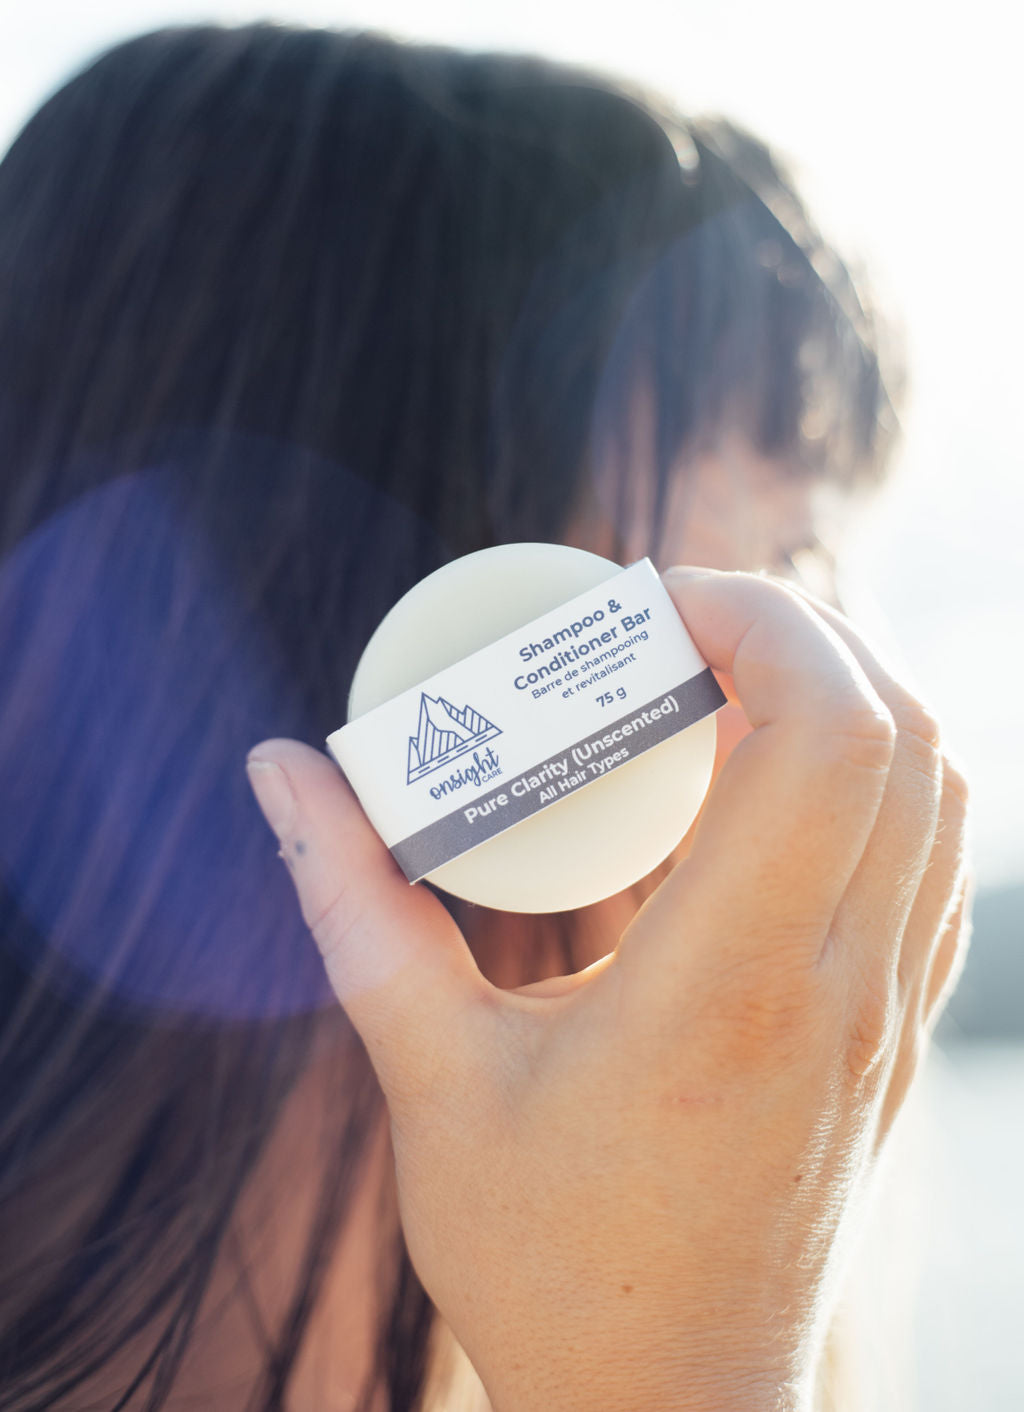 Travel Pure Clarity shampoo bar held up in front of dark hair and sunlight behind.